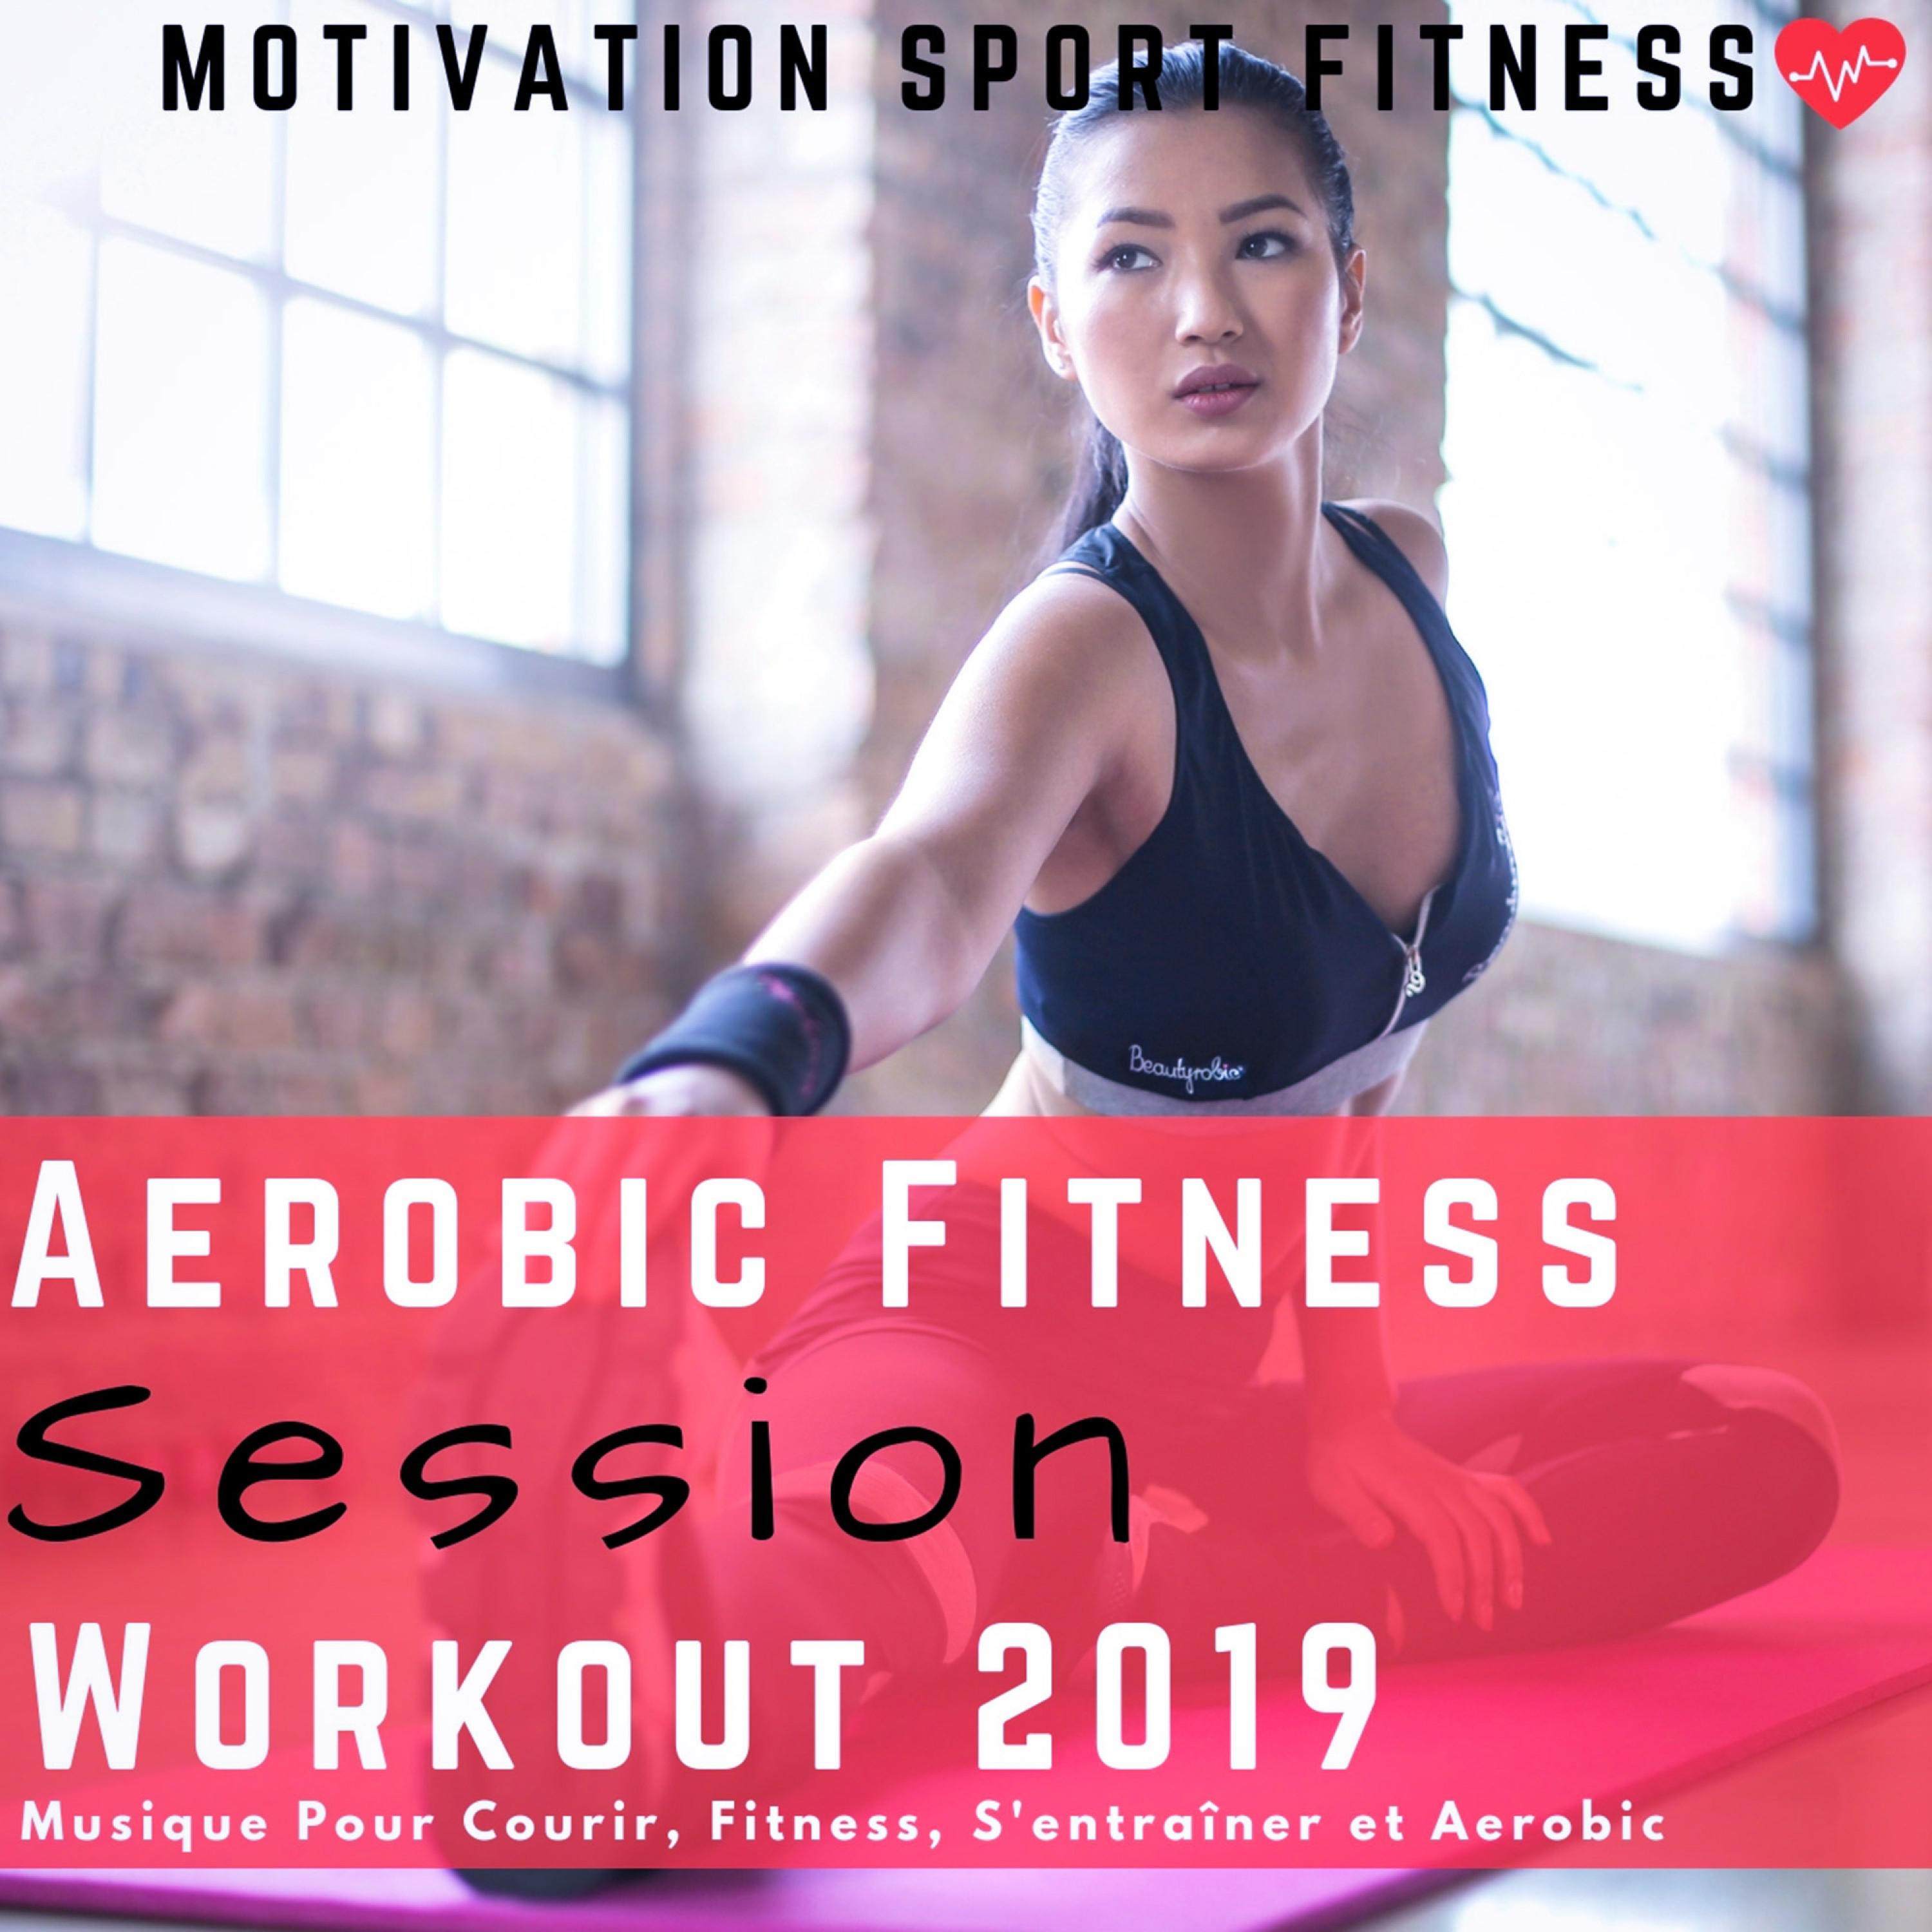 Aerobic Fitness Session Workout 2019